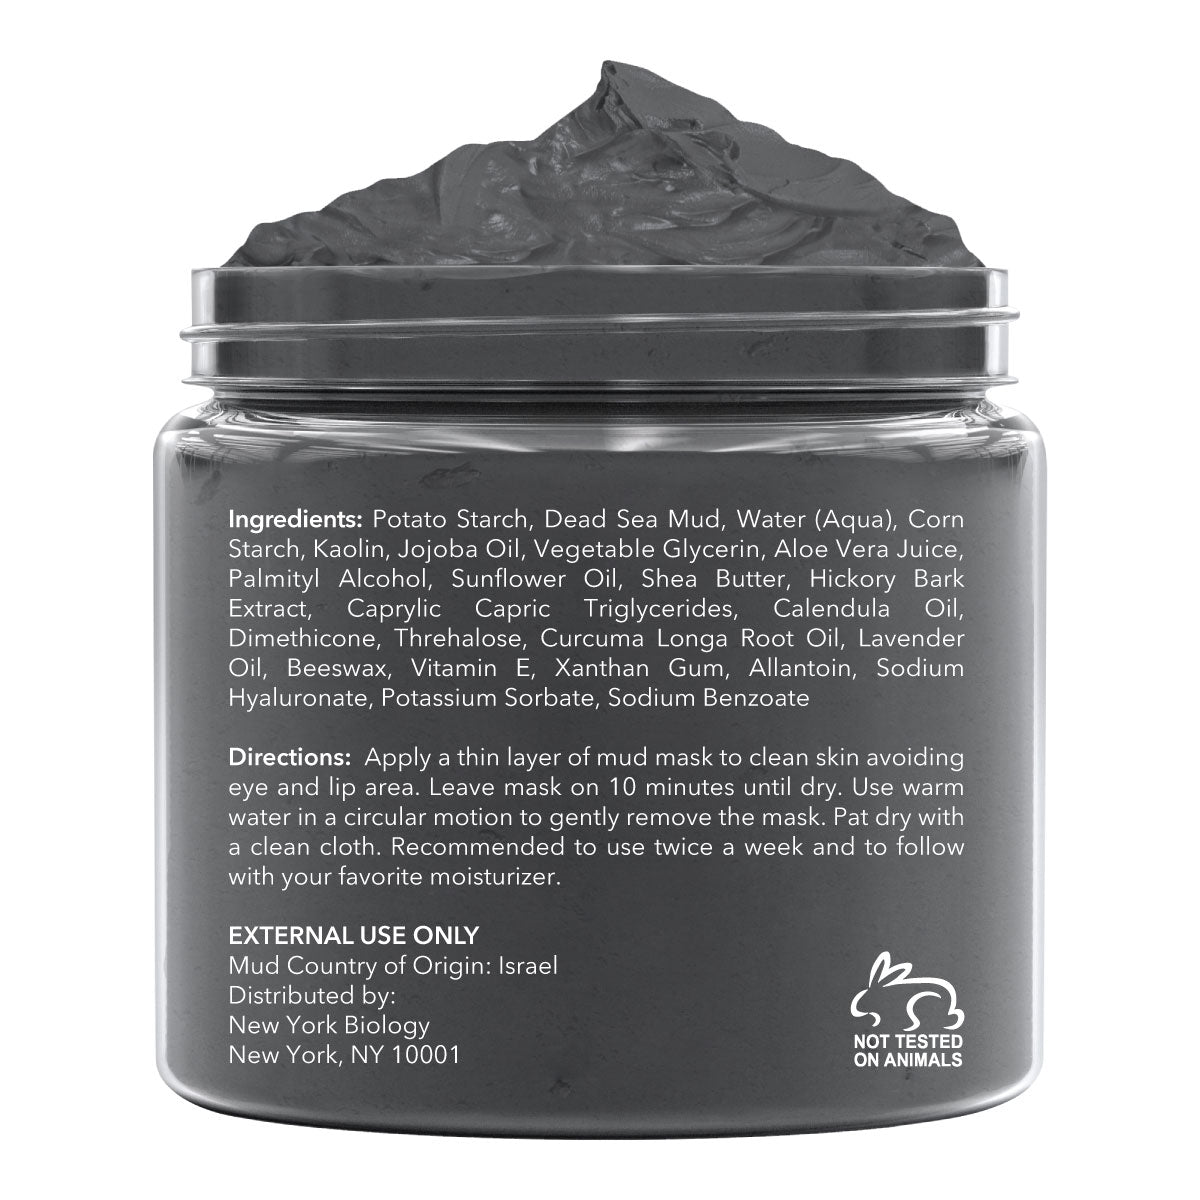 Dead Sea Mud Mask Infused with Lavender - 8.8 oz